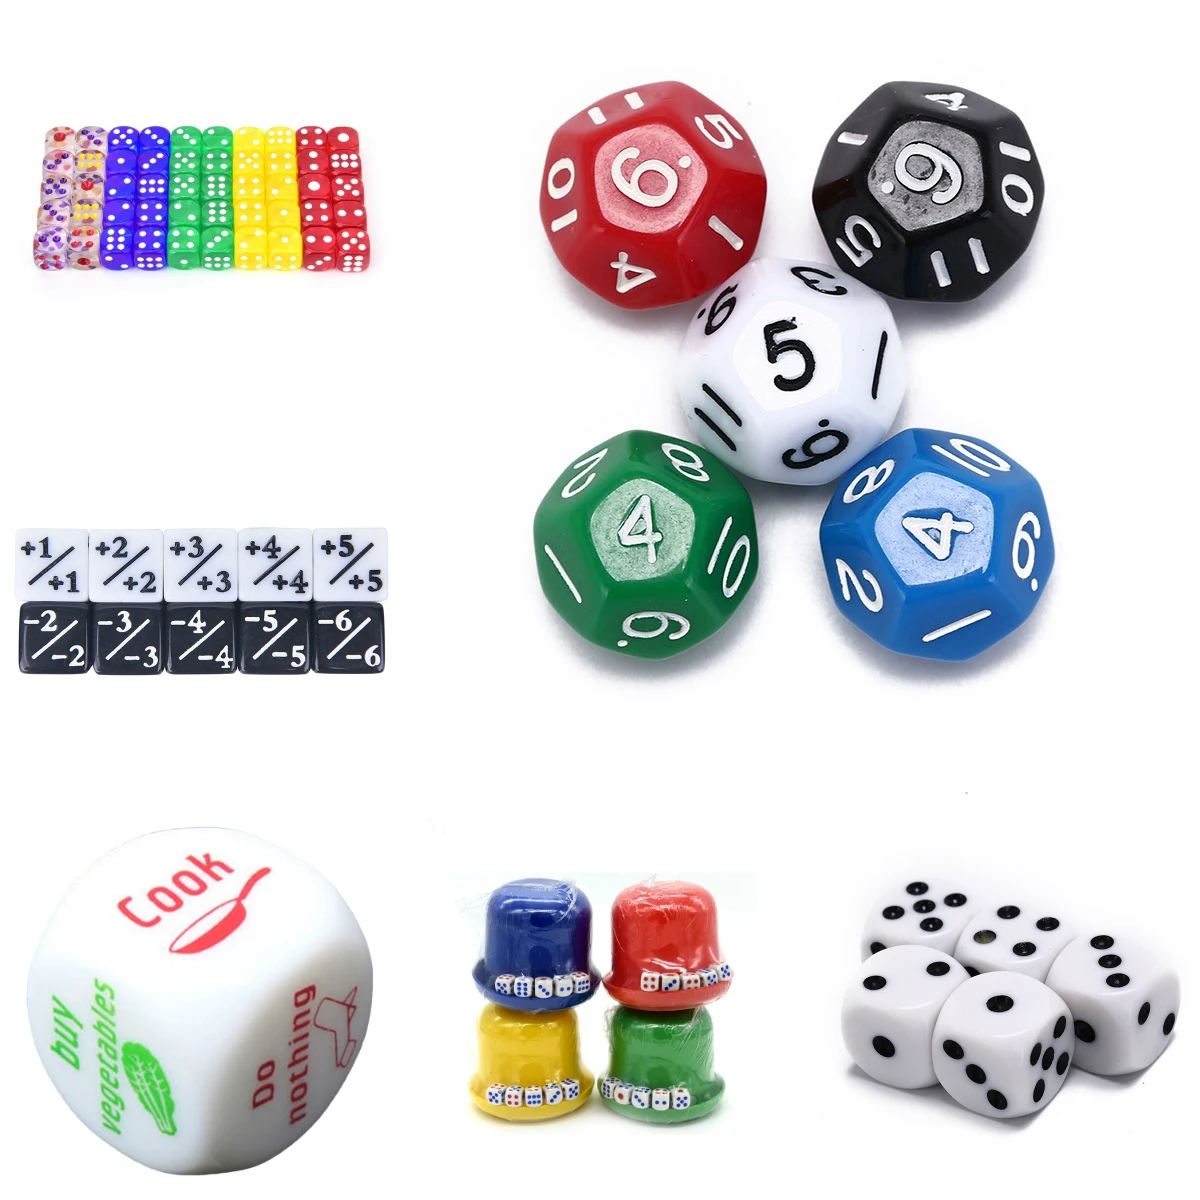 Wholesale Dices Set Colorful Accessories for Board Game Digital dice Game Multi Sided Acrylic Dice